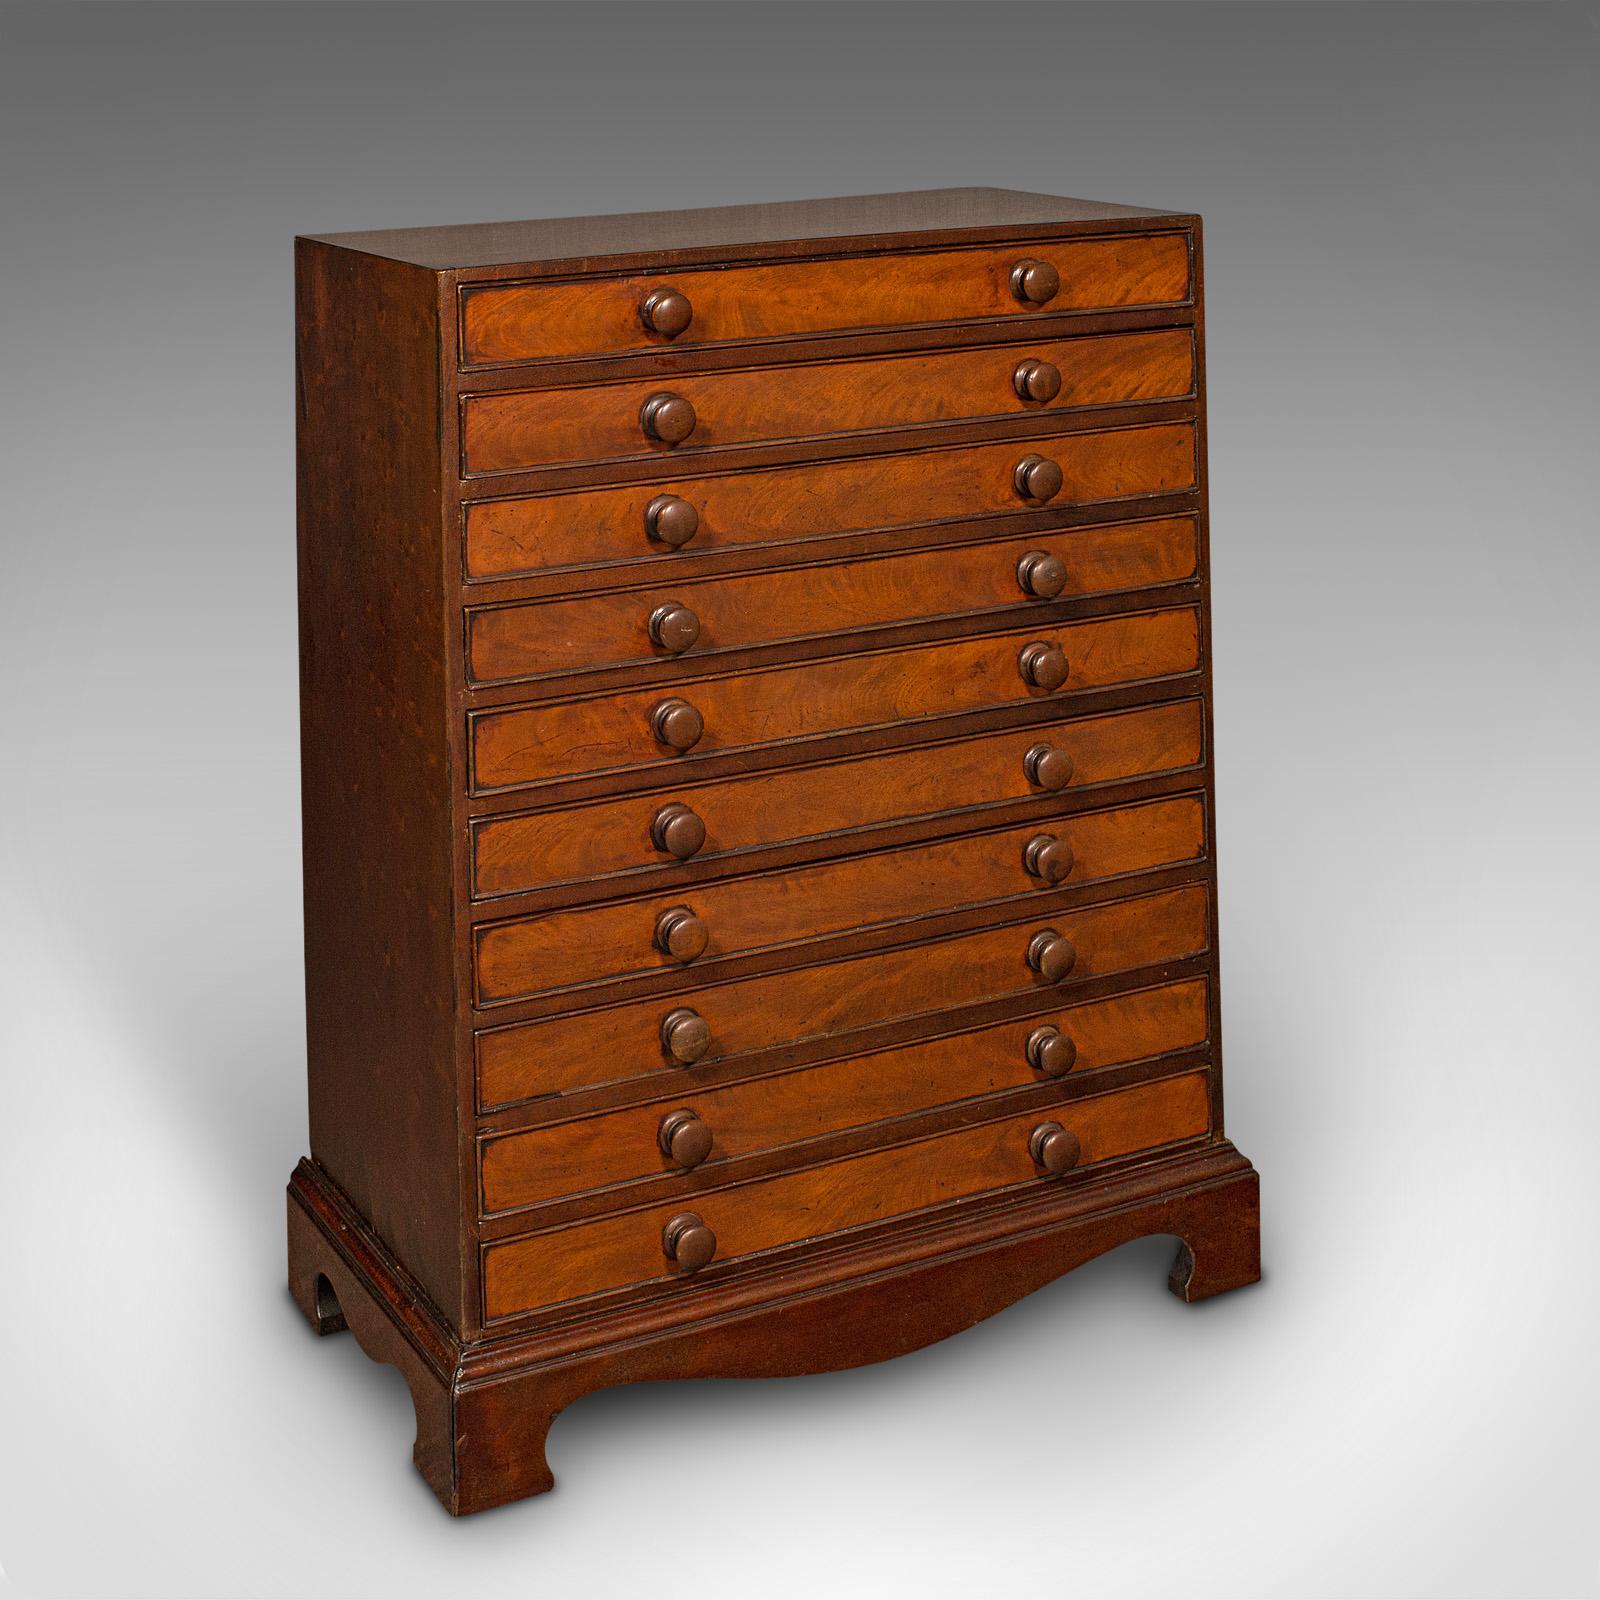 This is an antique specimen chest. An English, mahogany suite of collector's drawers, dating to the Georgian period, circa 1800.

Arrangement of ten drawers offers a comprehensive suite for the collector
Displays a desirable aged patina and in good